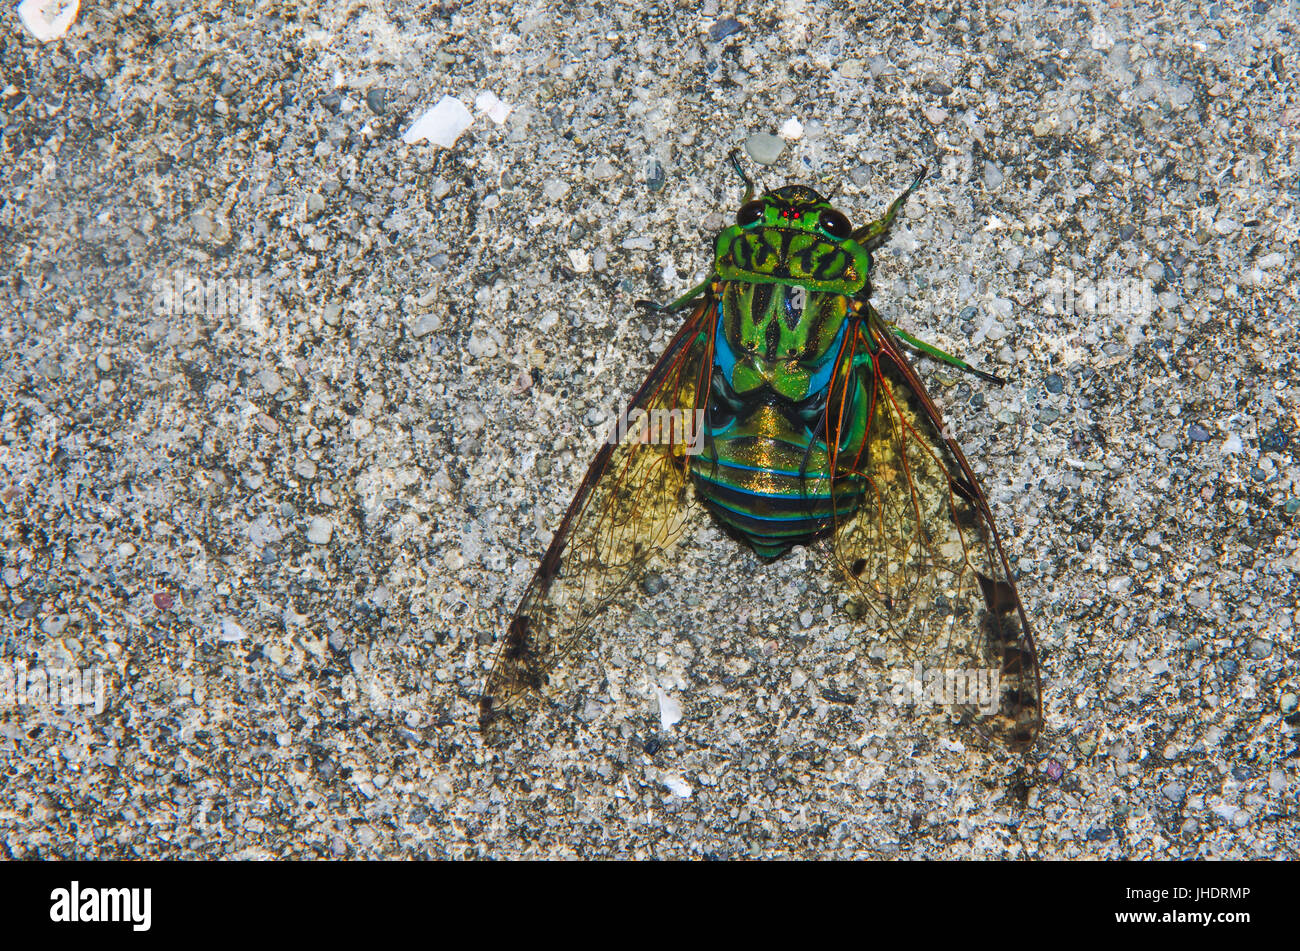 Cicada insect close up image with strong intense colors Stock Photo